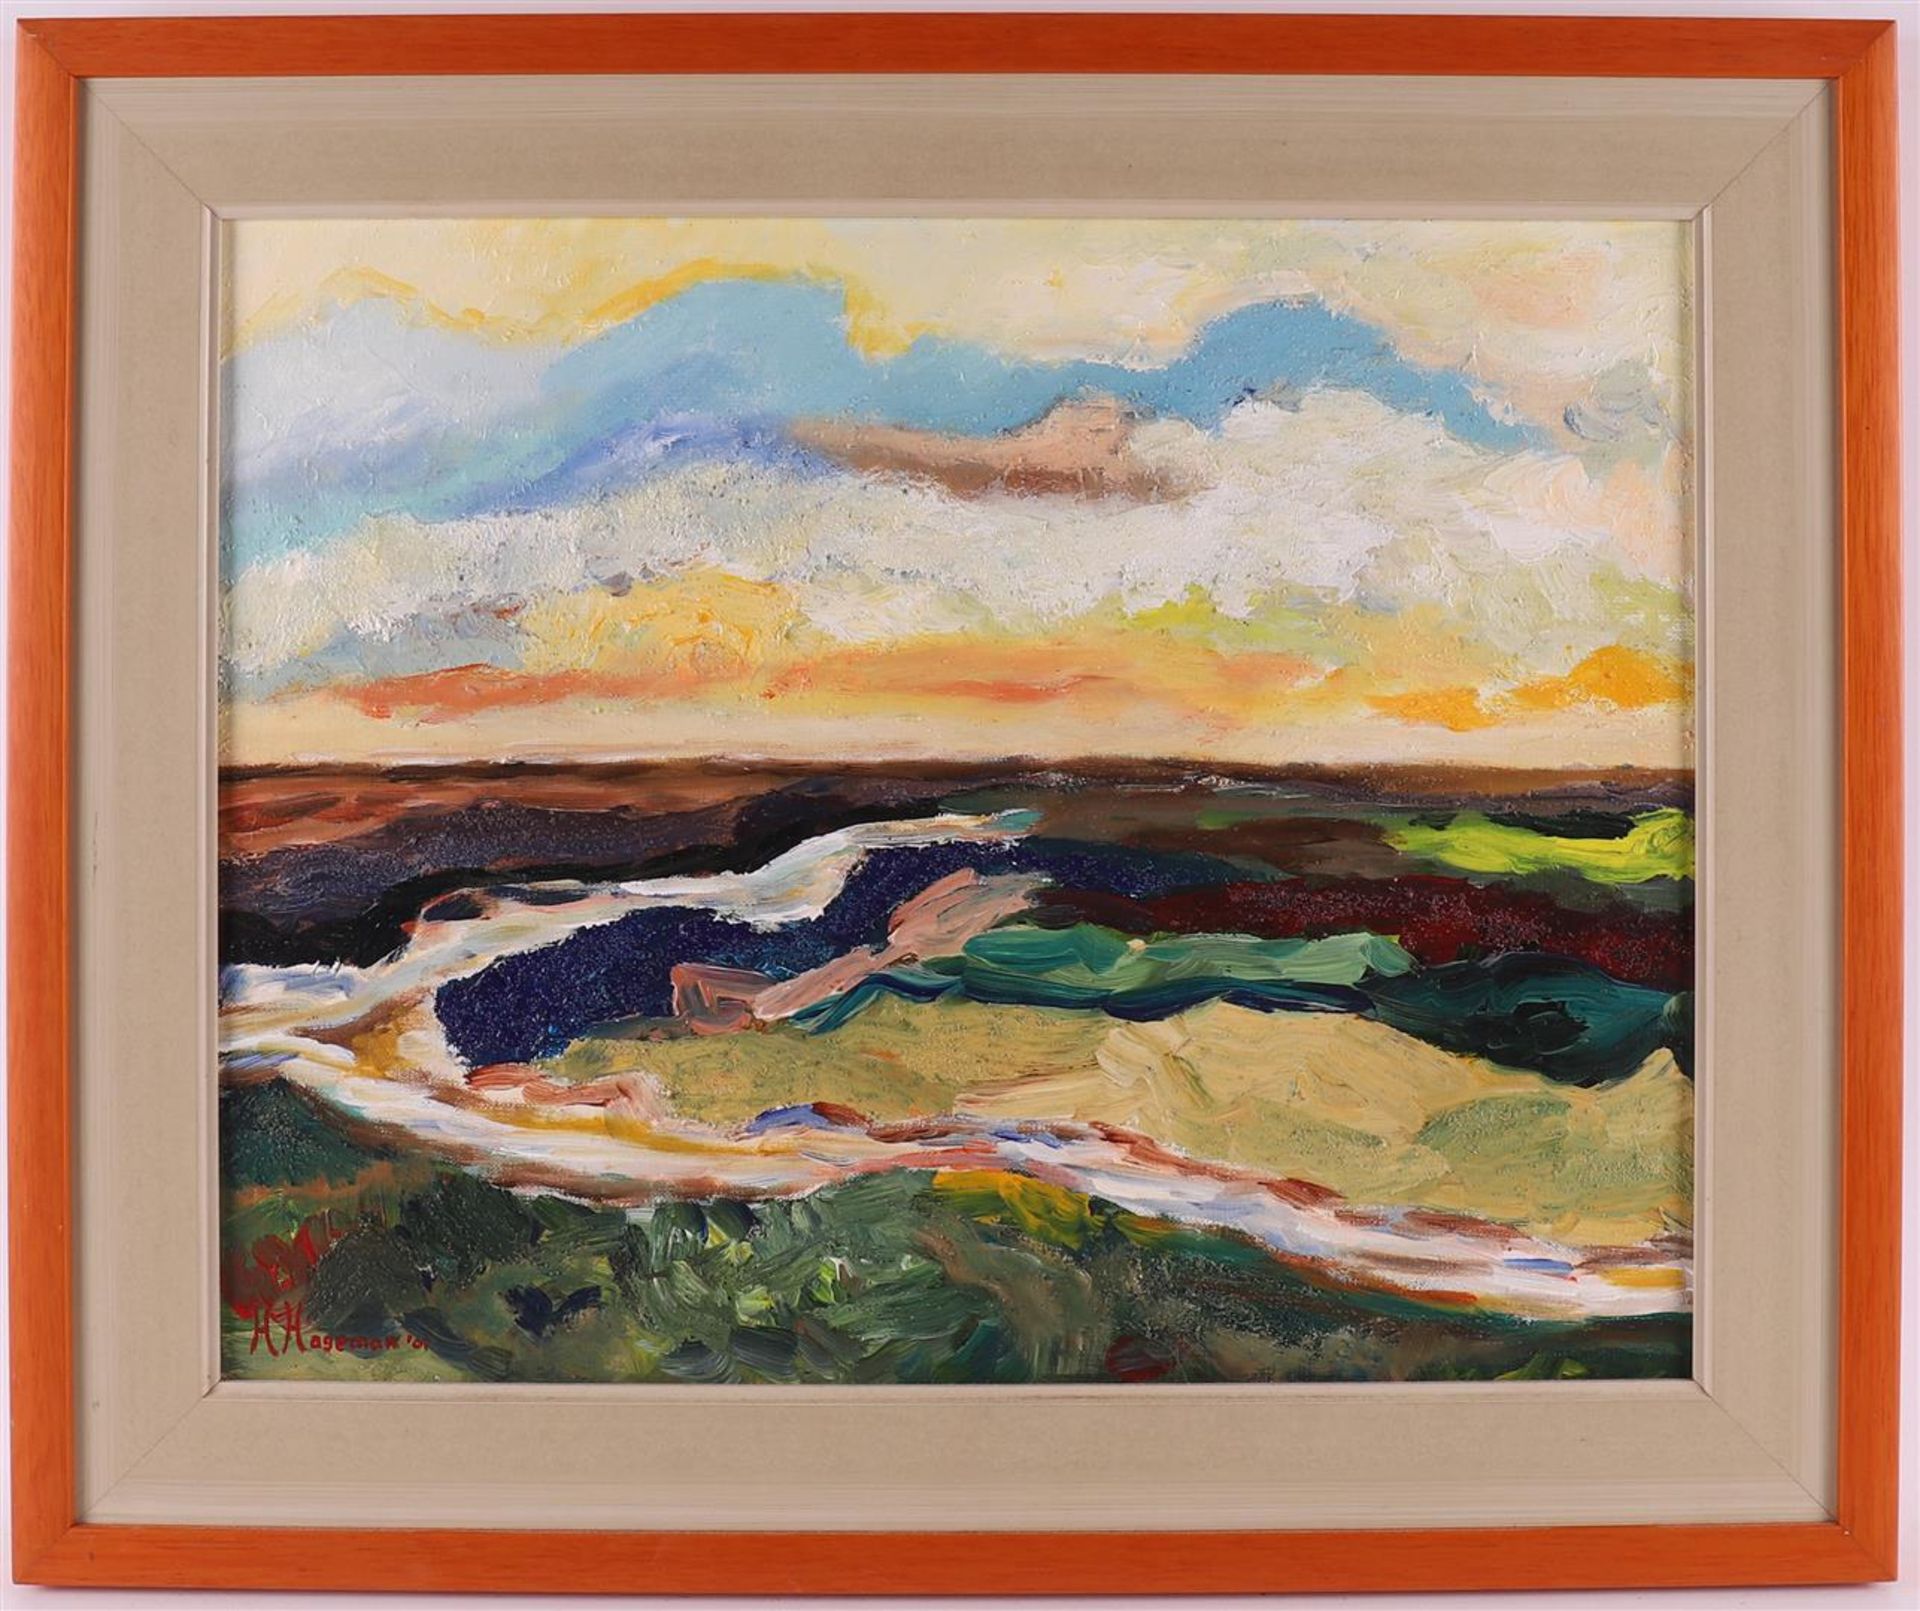 Hageman, Halbe (Norg 4-8-1946) "Landscape", signed in full l.r. and '01, oil paint/canvas, h 40 x